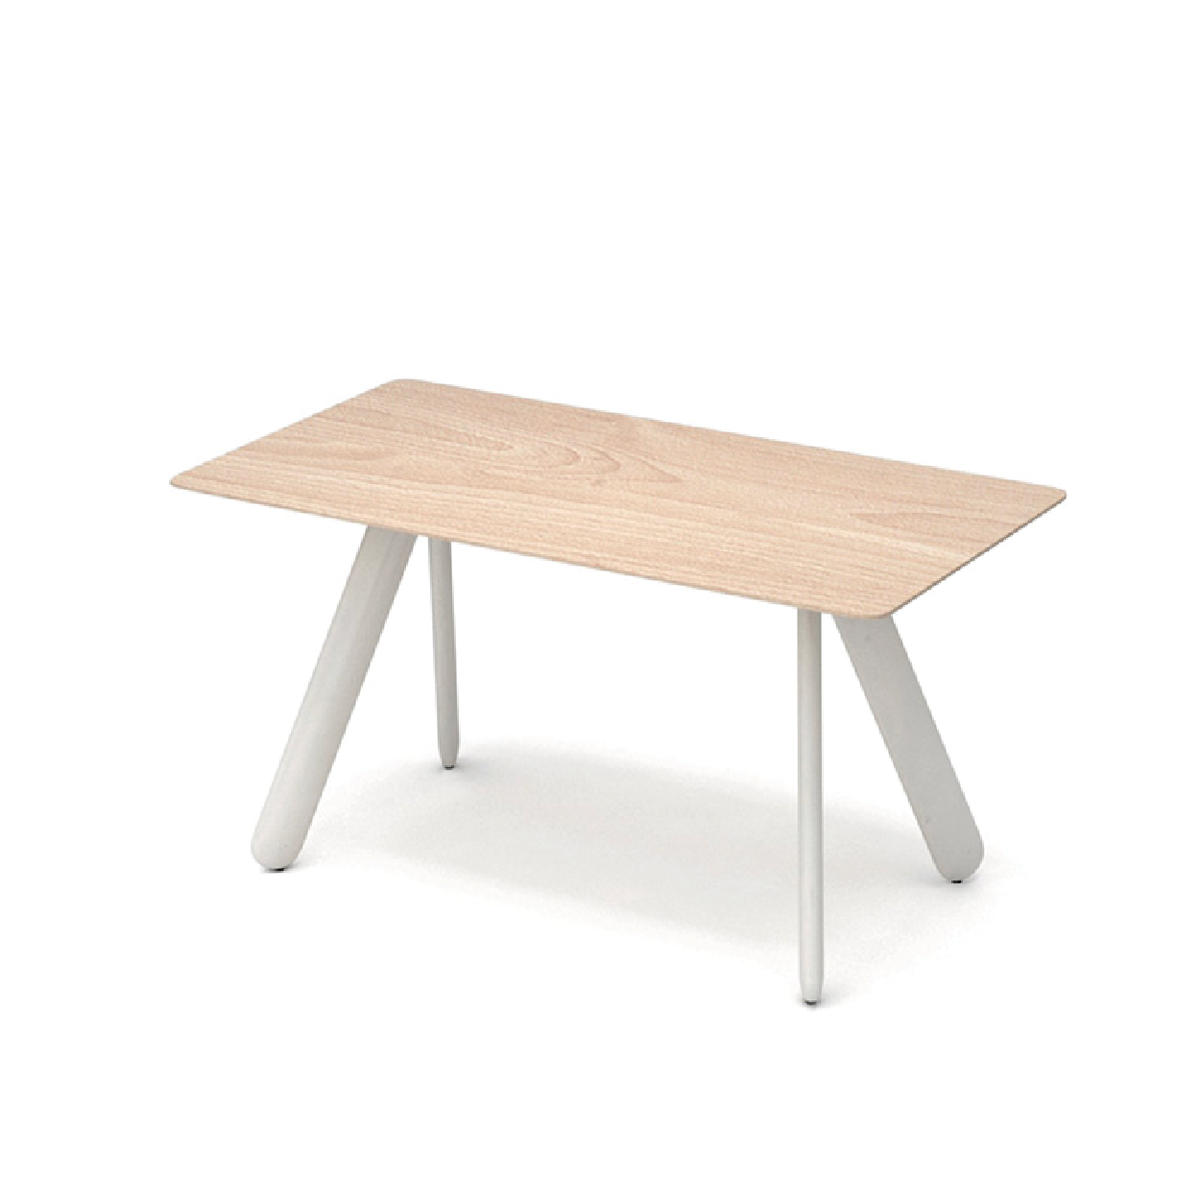 DT02 Table from ¥3,399